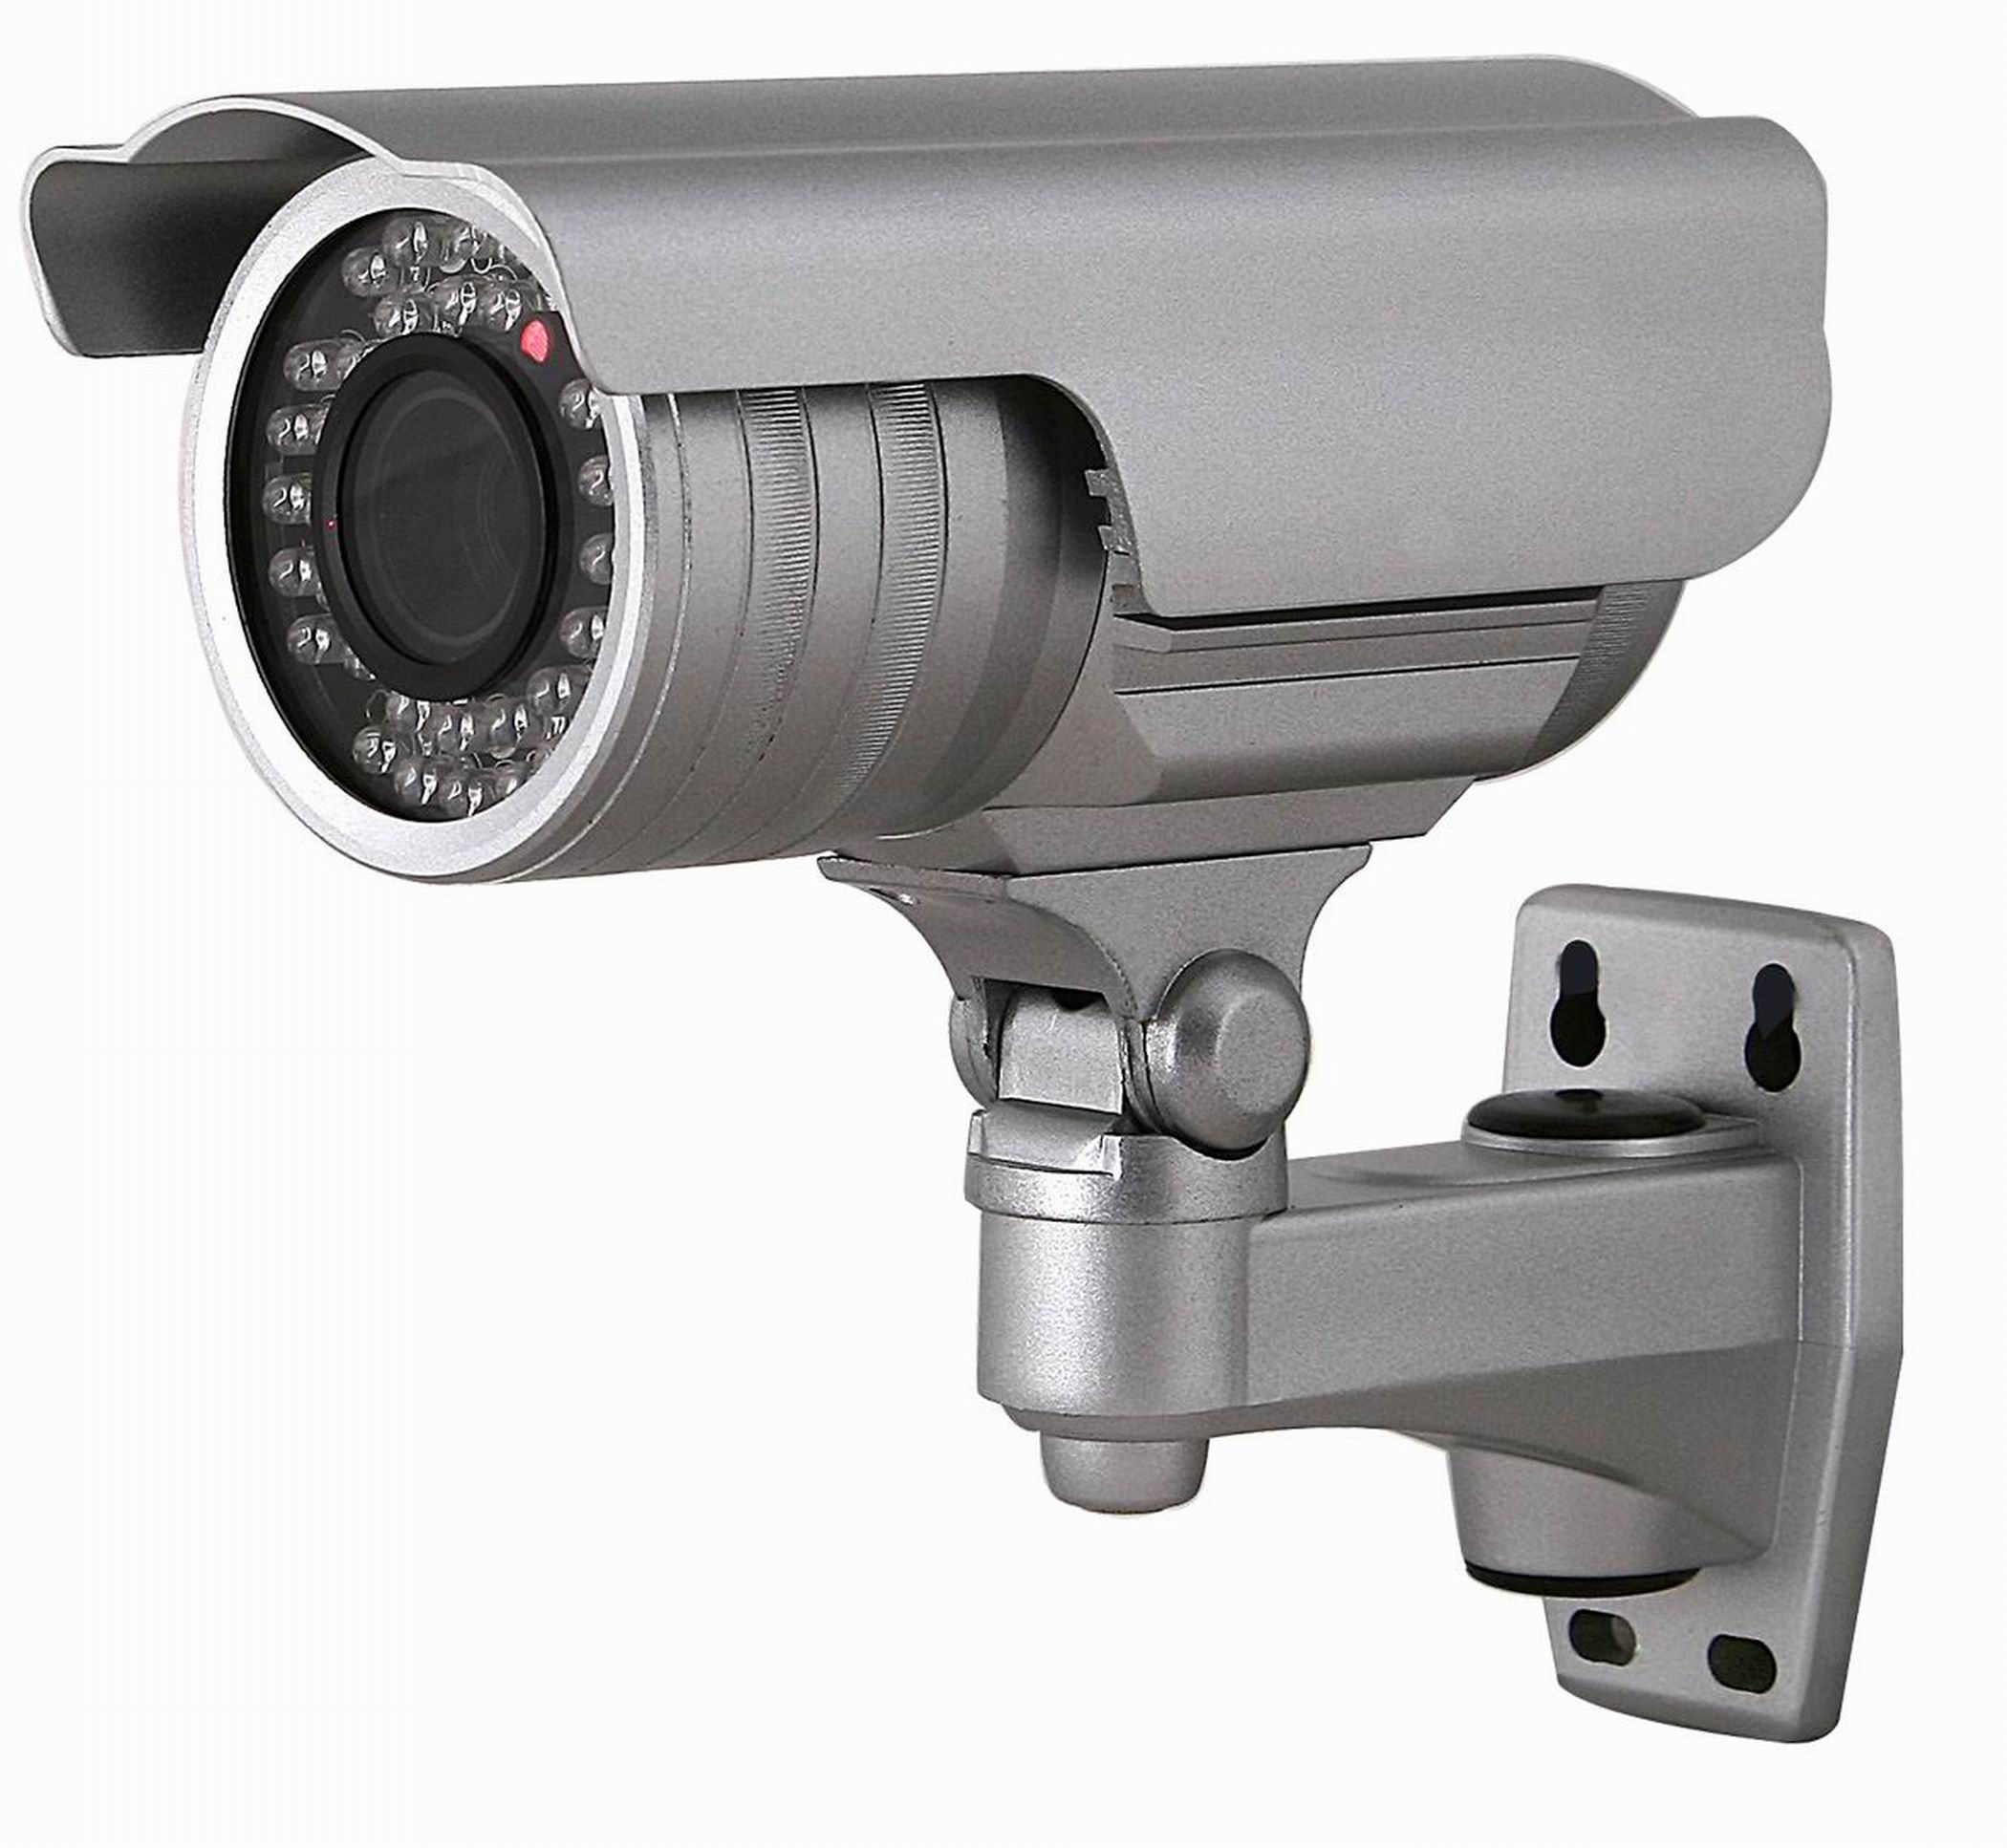 Dishwasher Outdoor security cameras